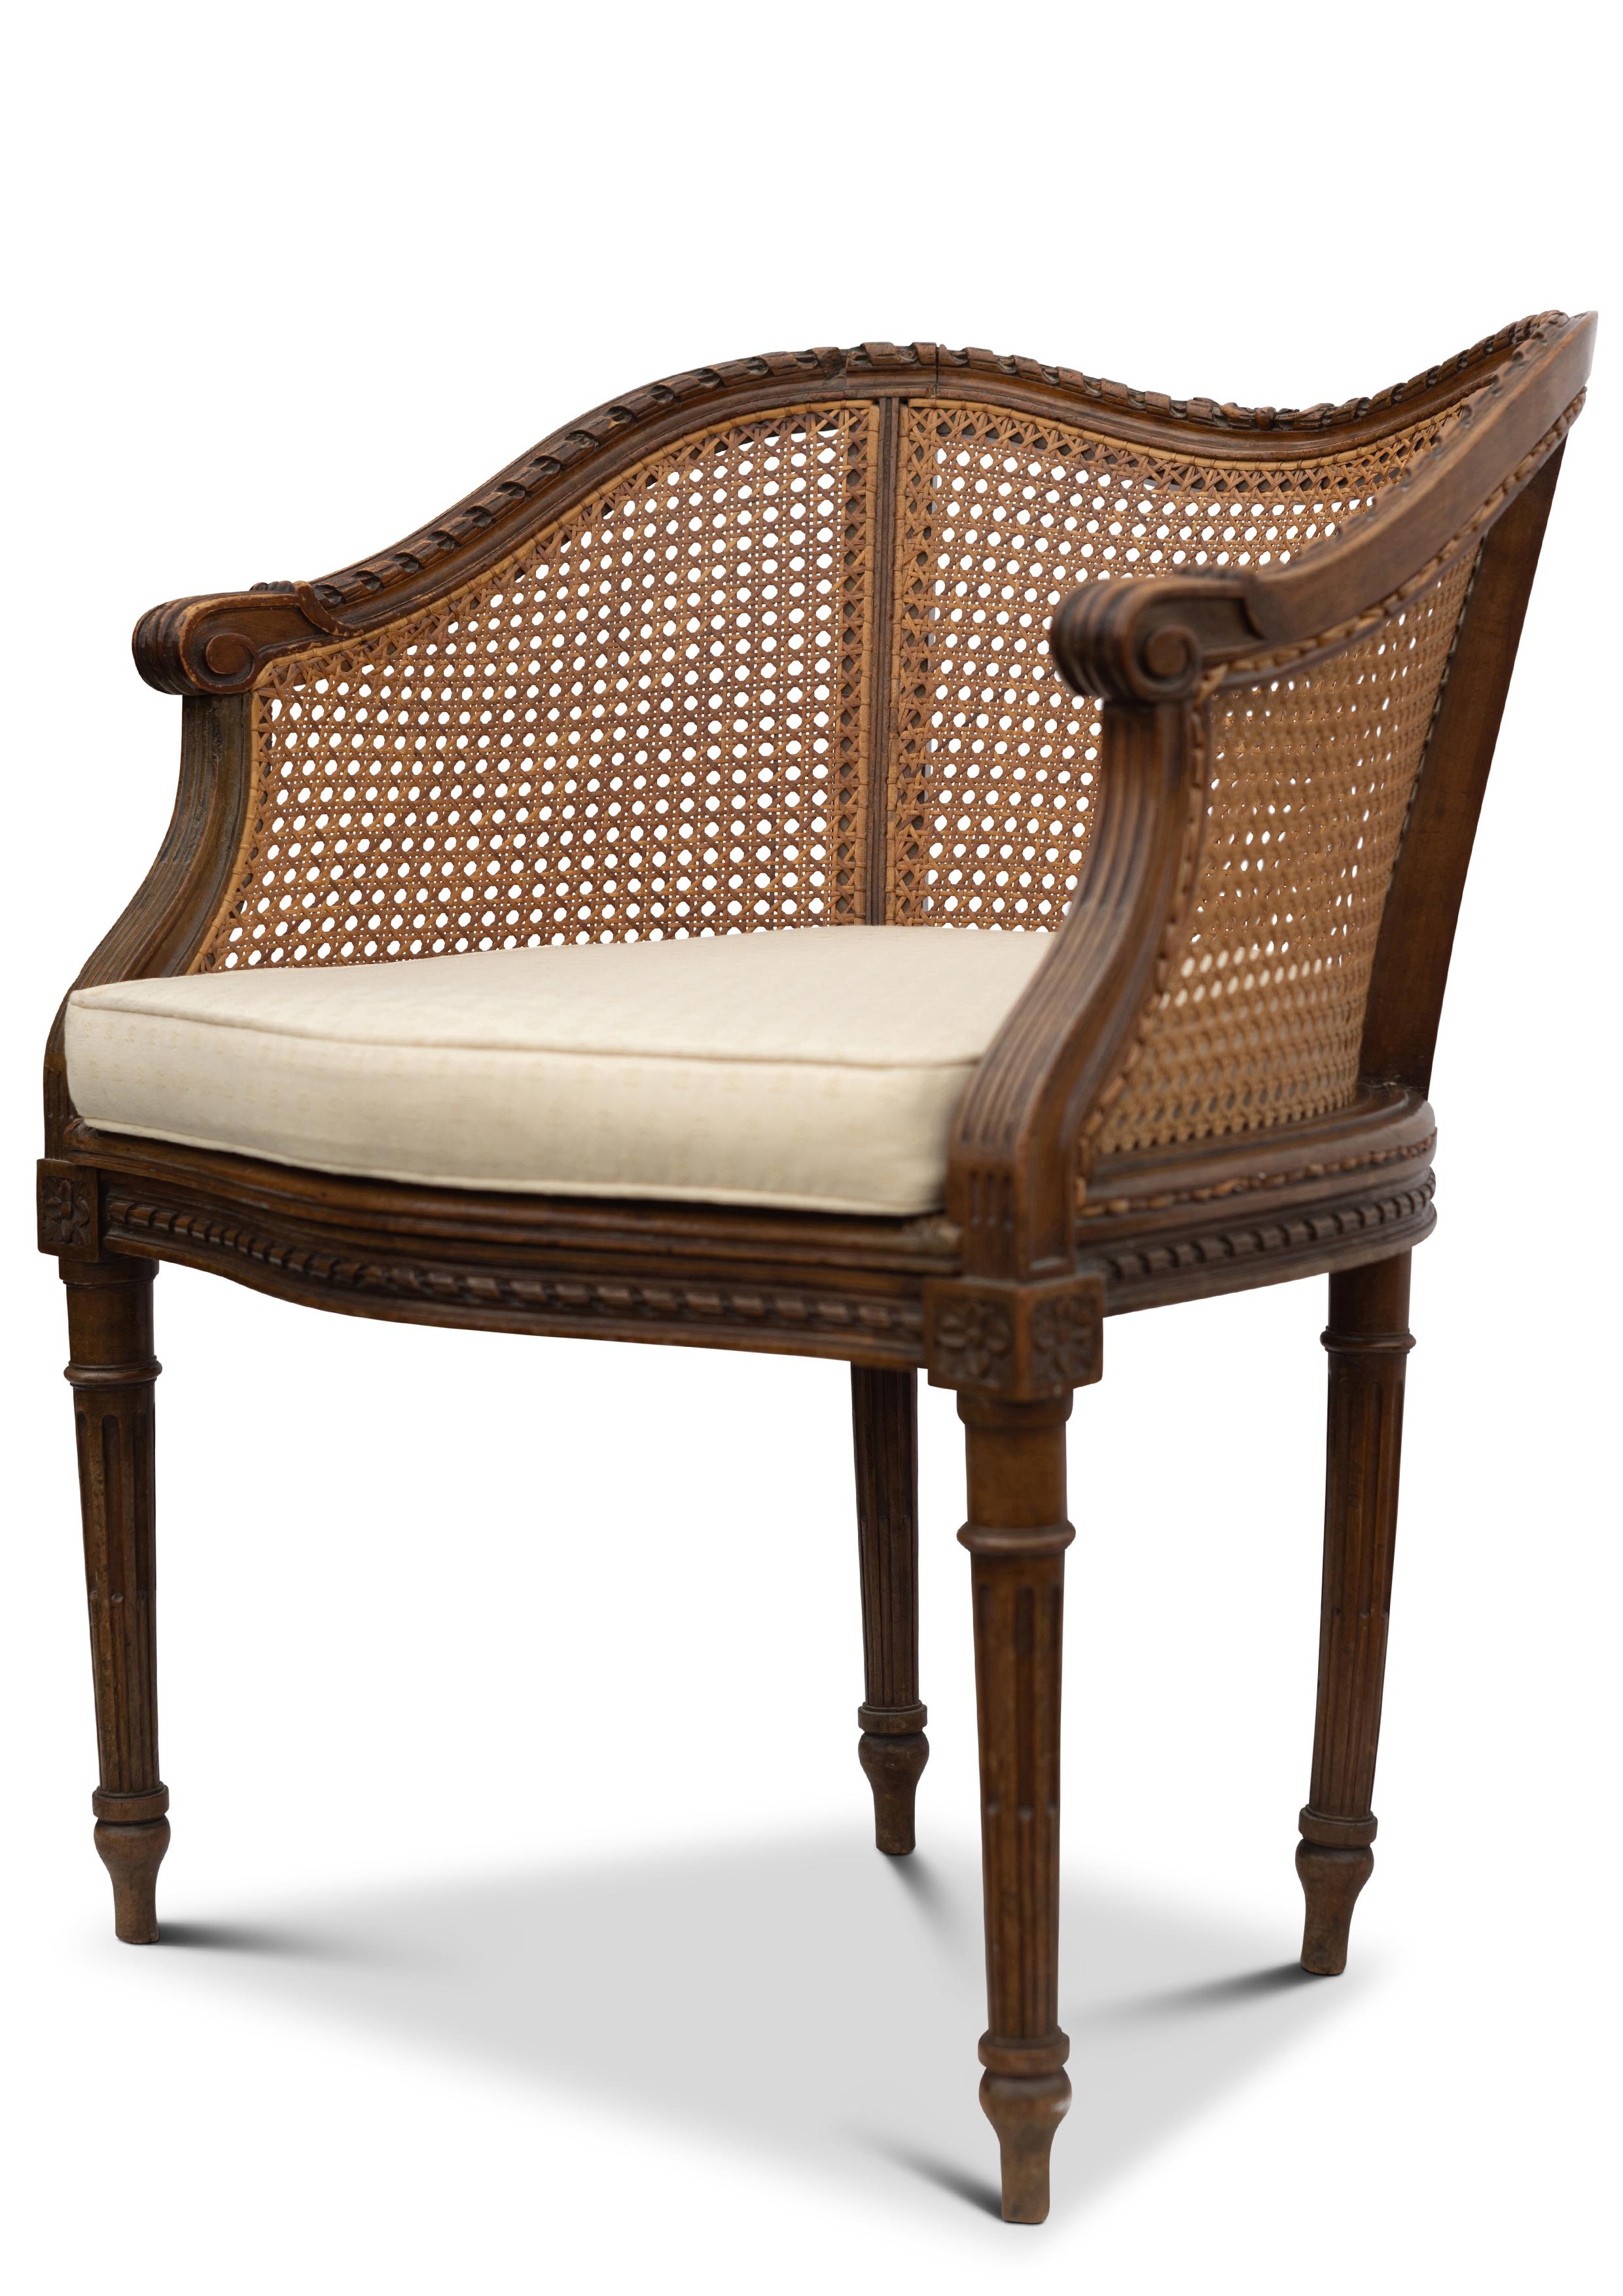 Empire Antique Bergère Beech & Cane Carved Armchair With Cushion & Reeded Legs For Sale